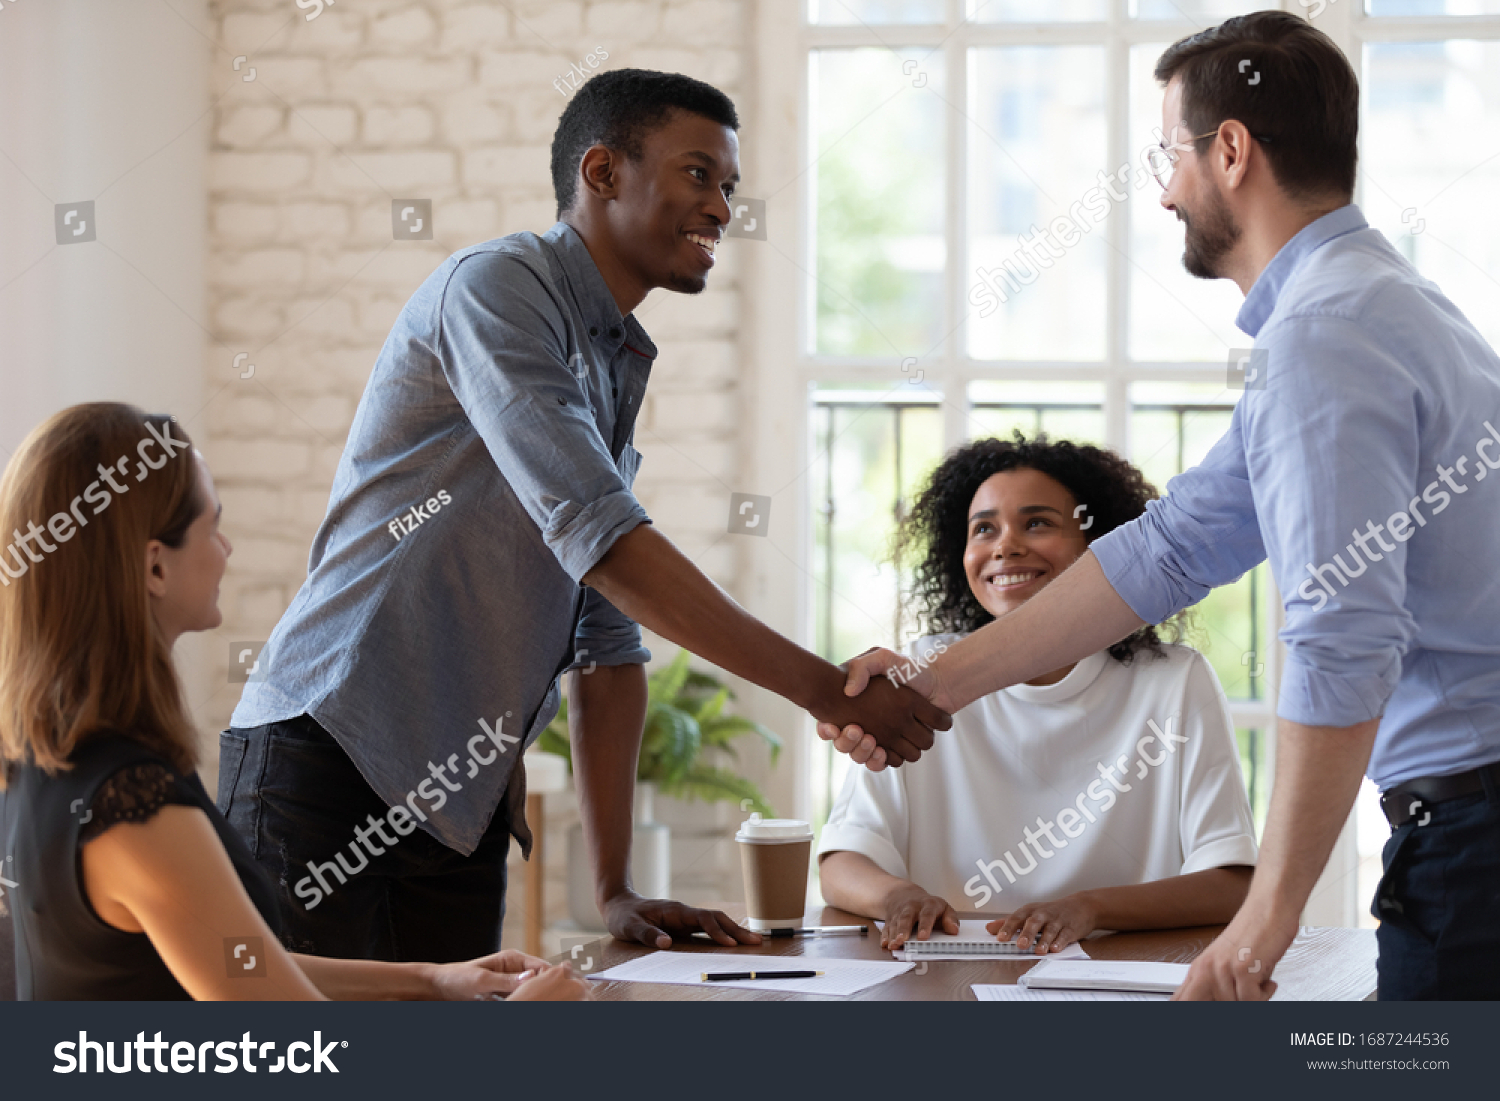 Before start negotiations African and Caucasian businessmen partners greets each other shake hands express respect friendly attitude. Closing deal, reach agreement, congratulate to promoted employee #1687244536